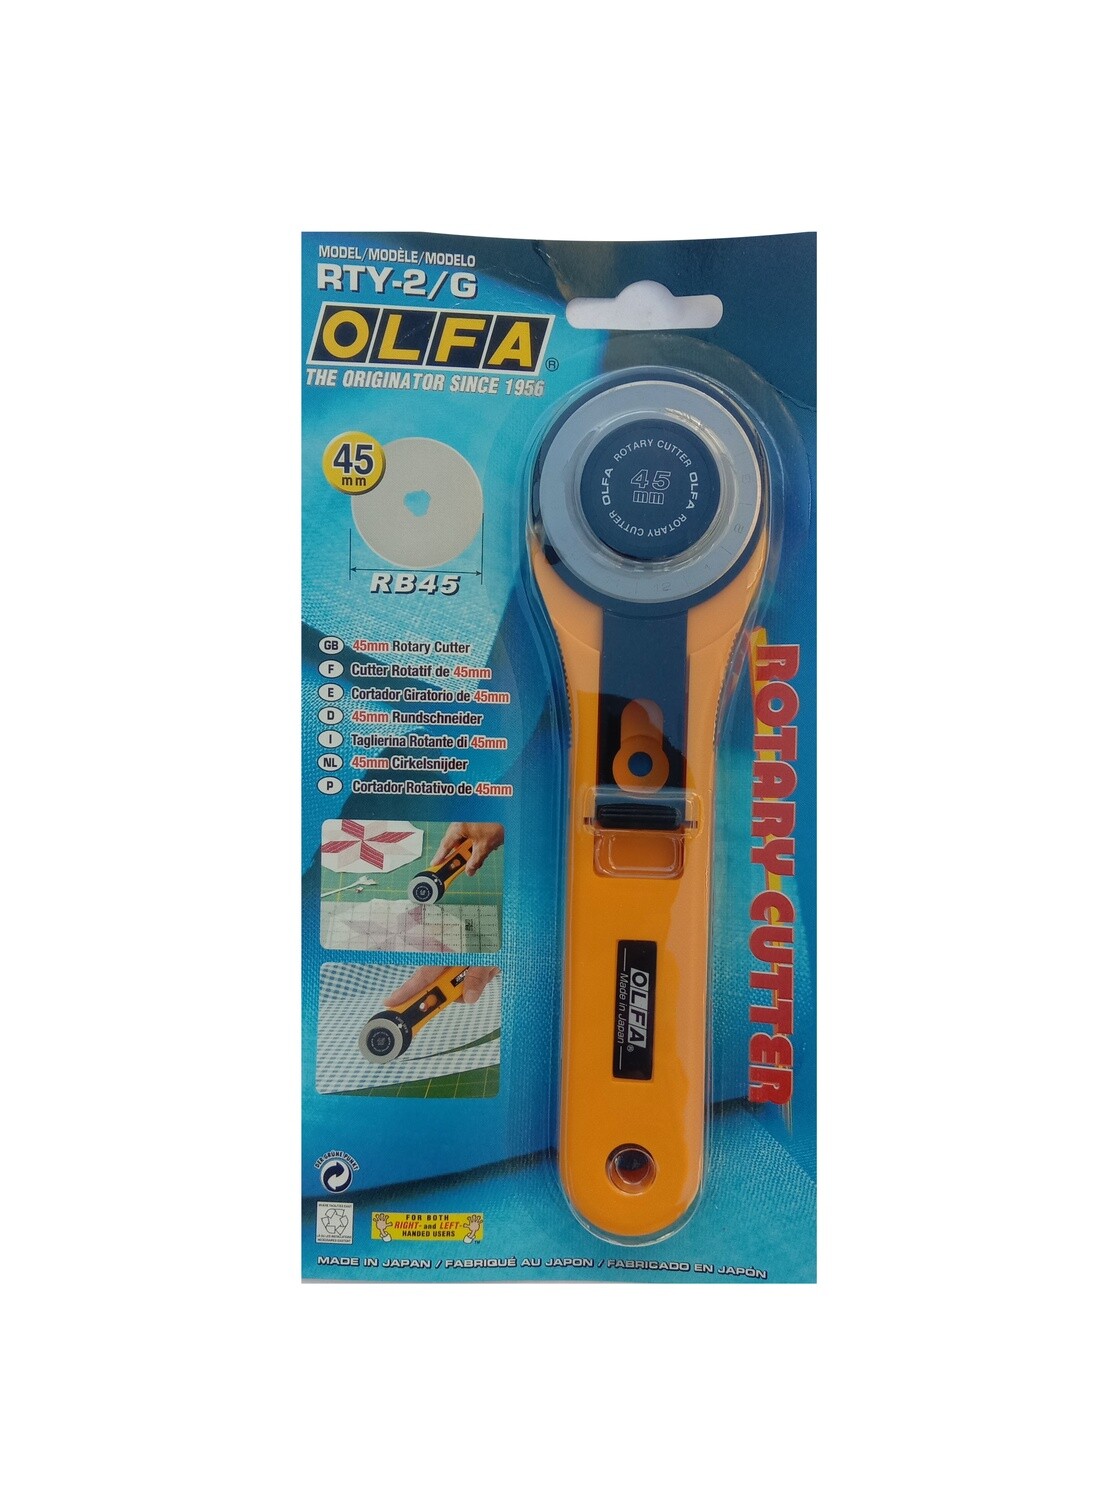 OLFA RTY-2/G ROTARY CUTTER BLADE LAME POUR OU MASSICOT ROTATIF 0091511300185 45mm STRAIGHT COUPE DECOUPE COUTURE LOISIR CREATIF ART PRO COMASOUND KARTEL CSK ONLINE